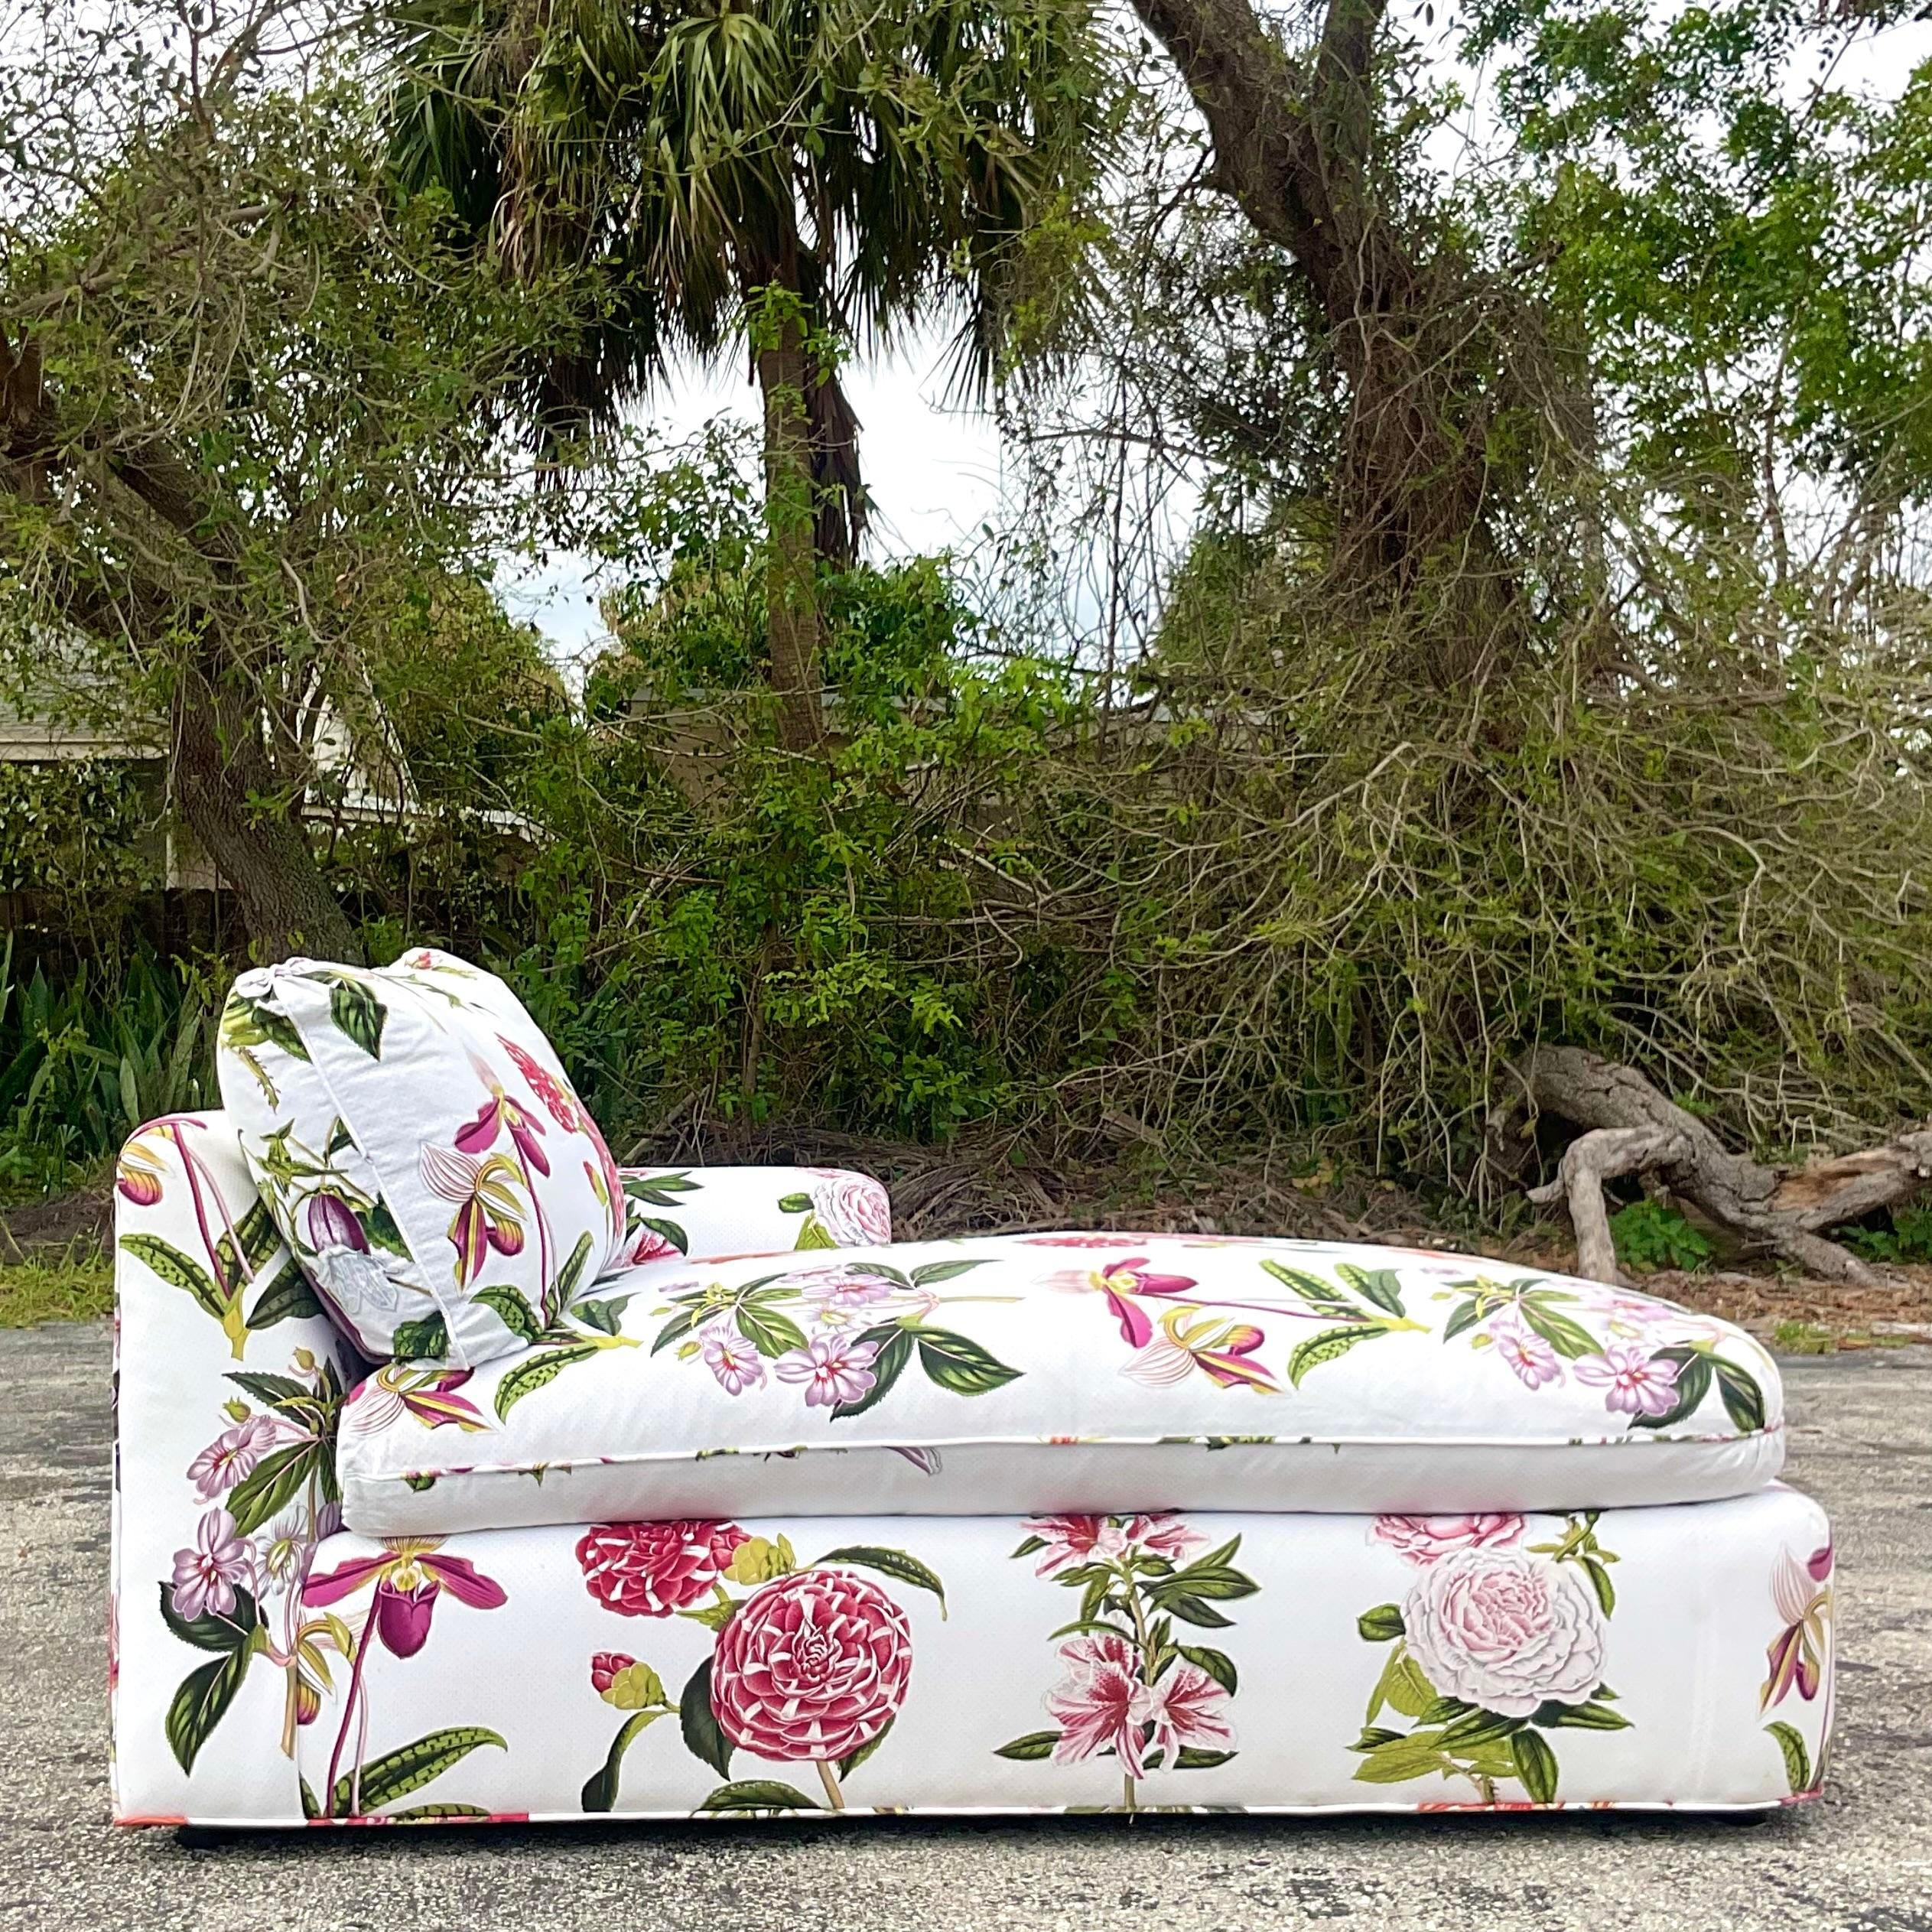 Cotton Vintage Regency Printed Floral Down Chaise Lounge